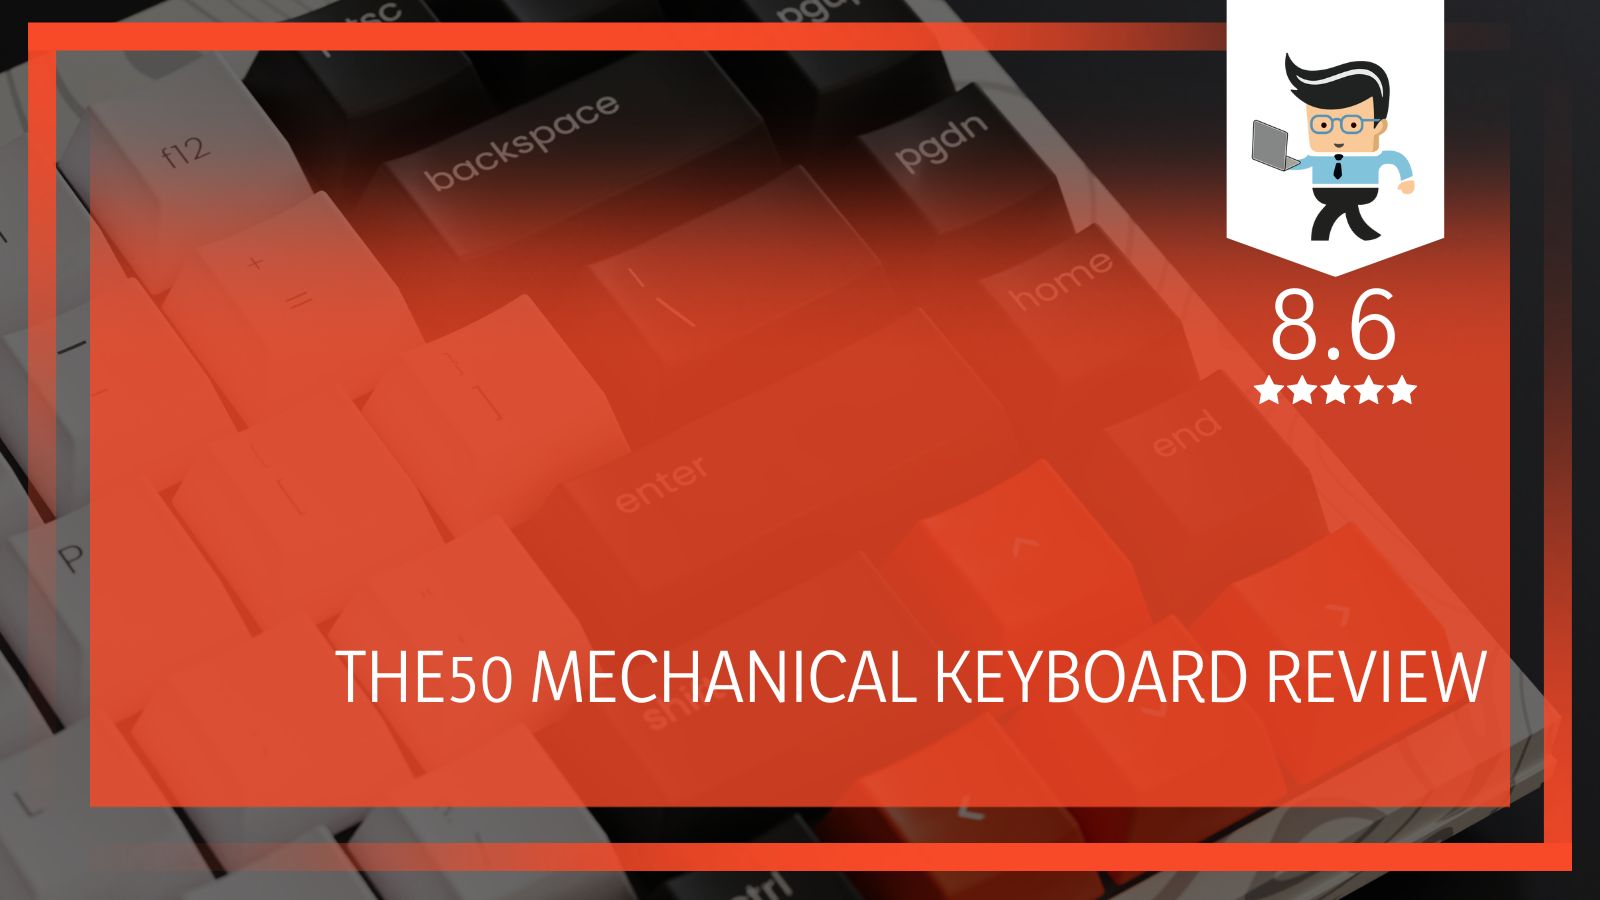 The Mechanical Keyboard Switches